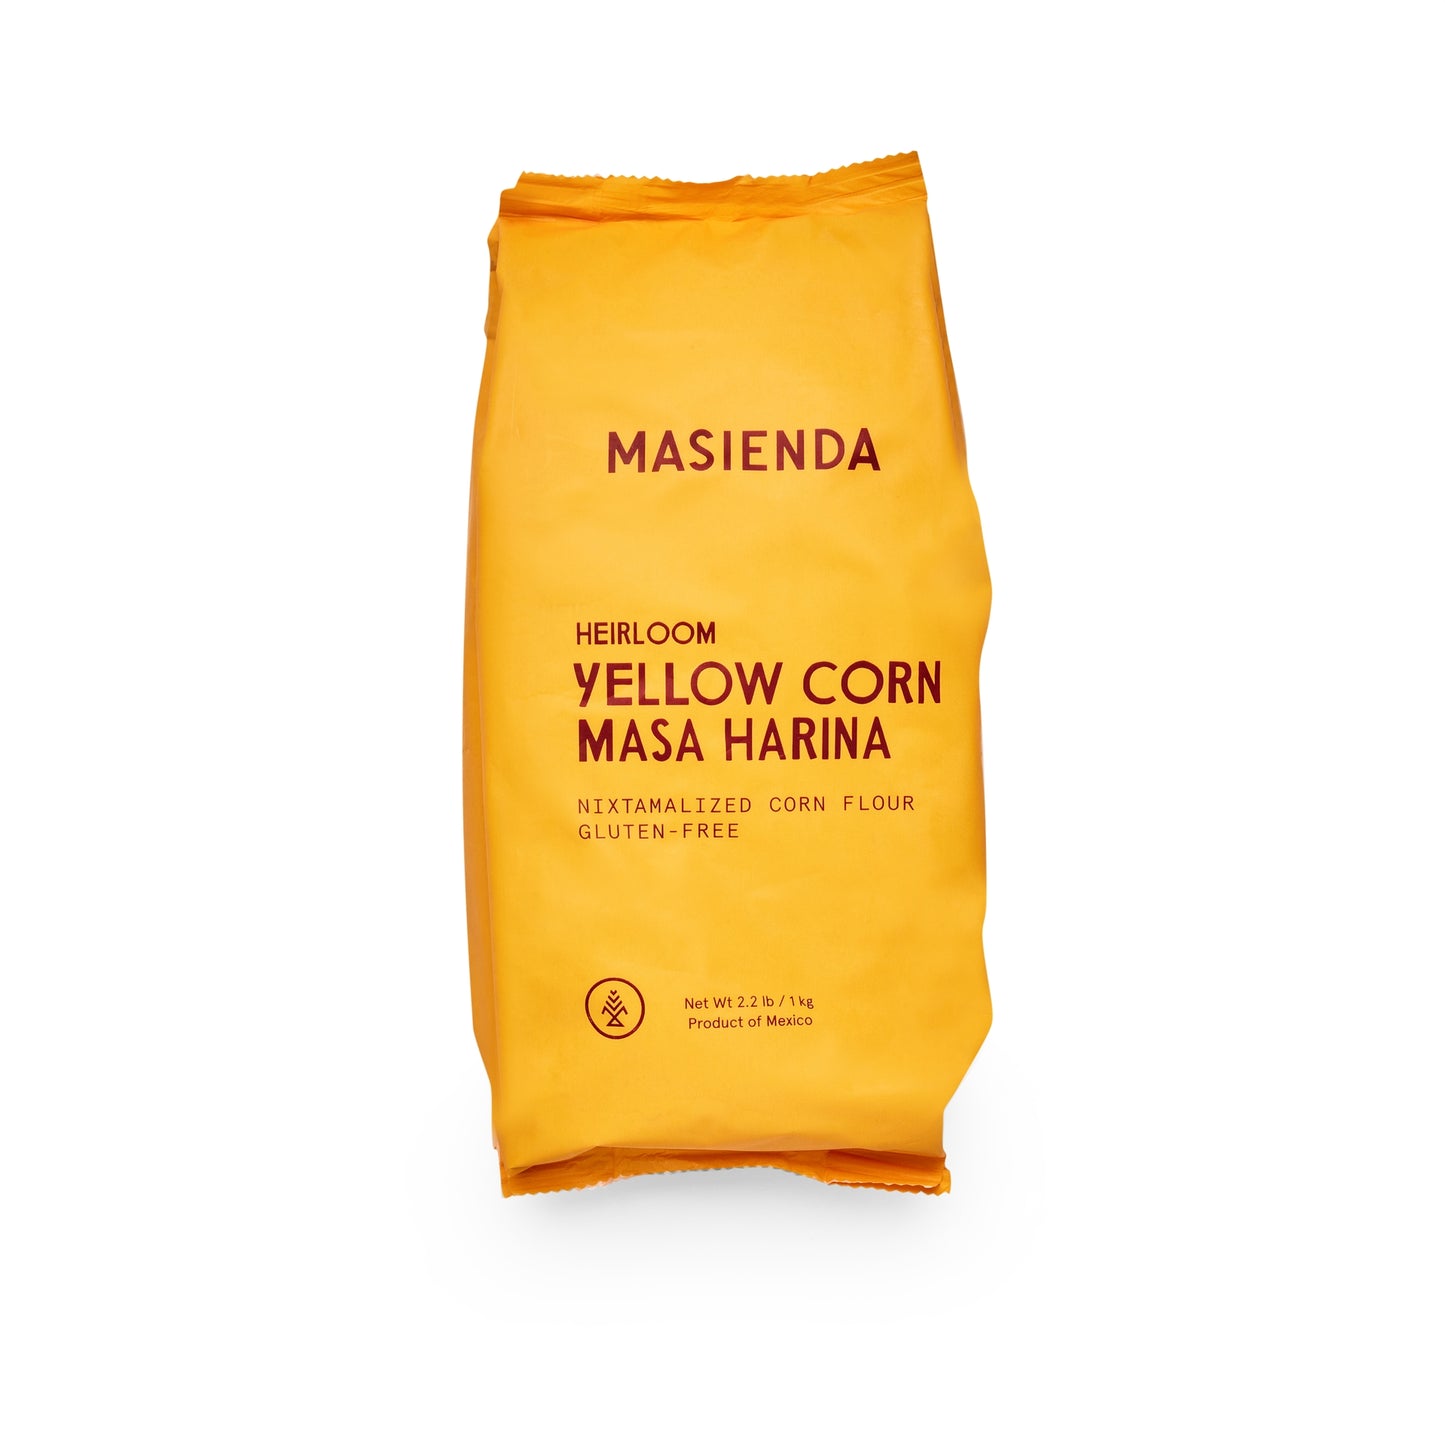 Masienda's best-selling Heirloom Yellow Corn Masa Harina is a fine-ground nixtamalized corn flour. Its deep flavor comes from high quality heirloom corn, which is cooked, slow dried and milled to perfection in small batches. Never genetically modified. Always gluten-free.